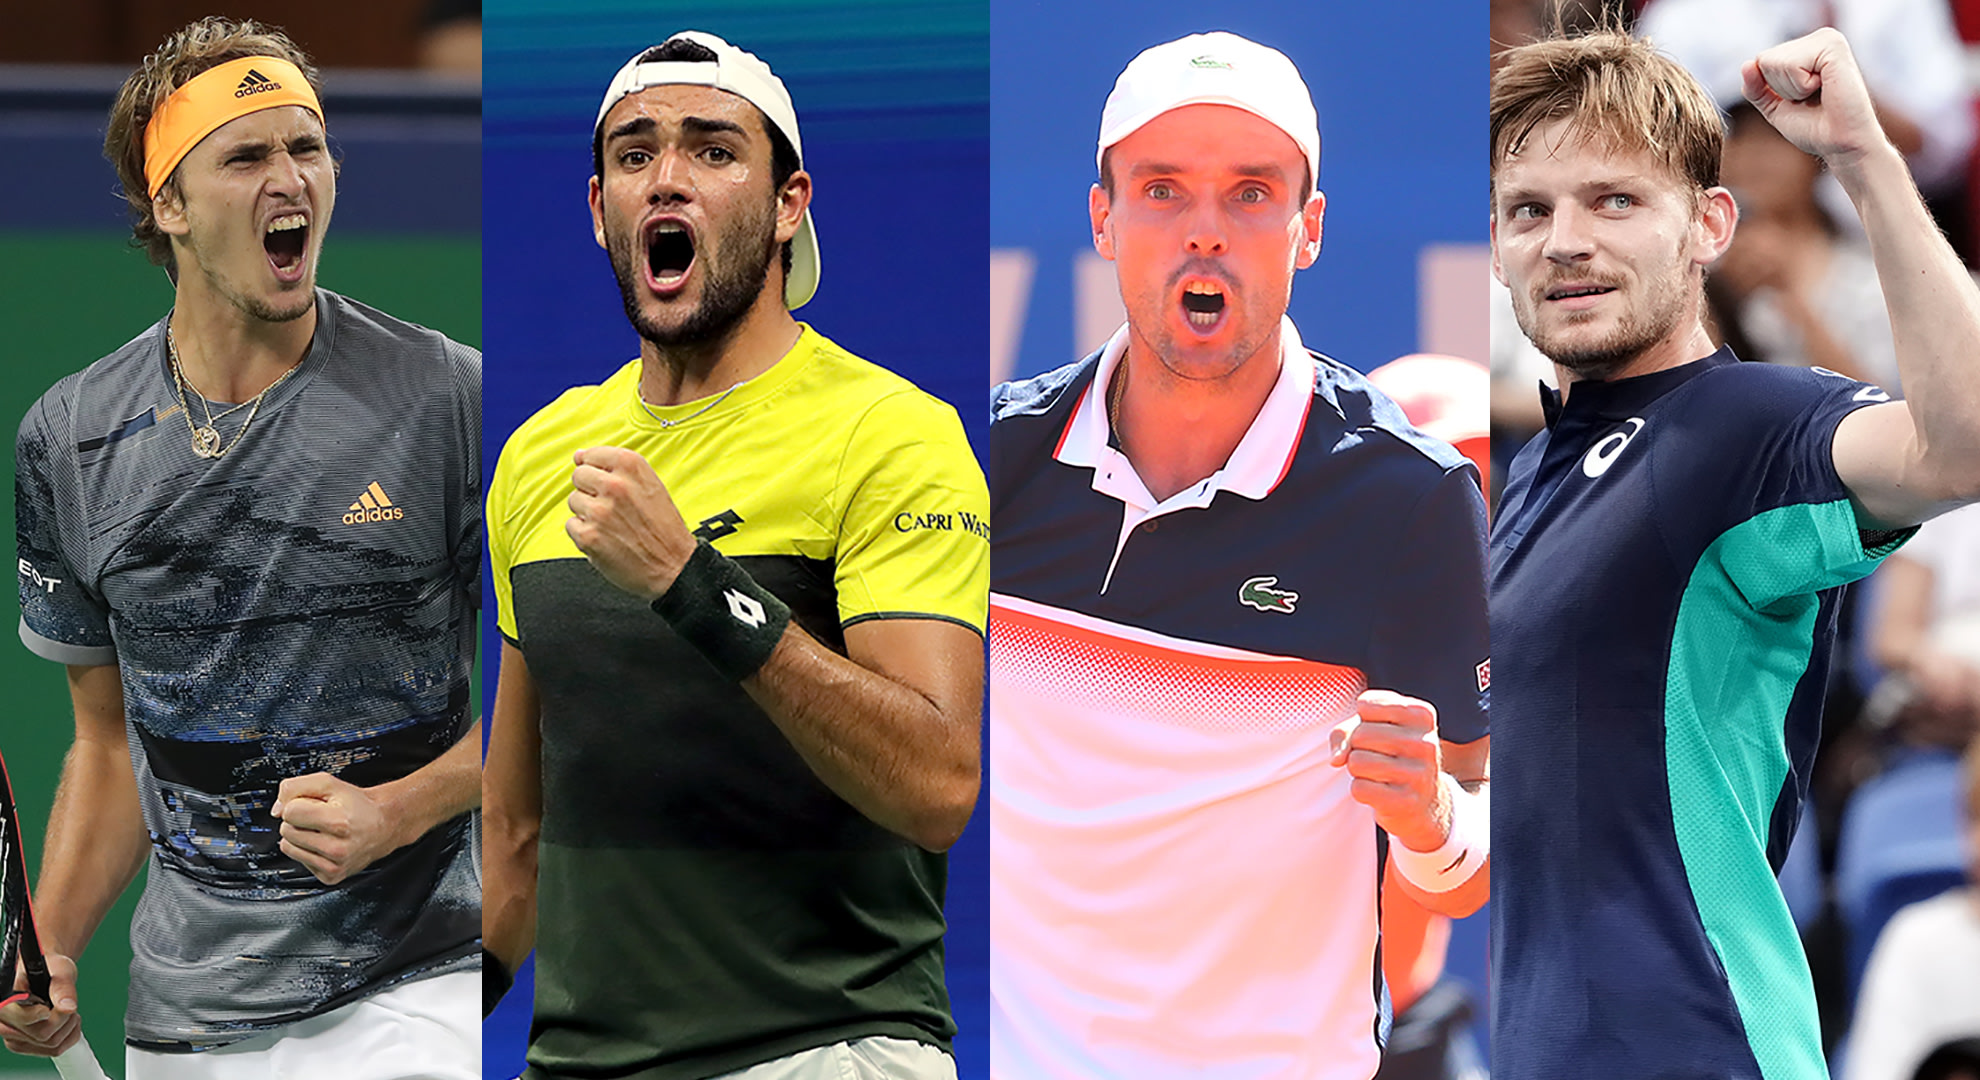 Chase for the Championships ATP race heats up; WTA lineup is set